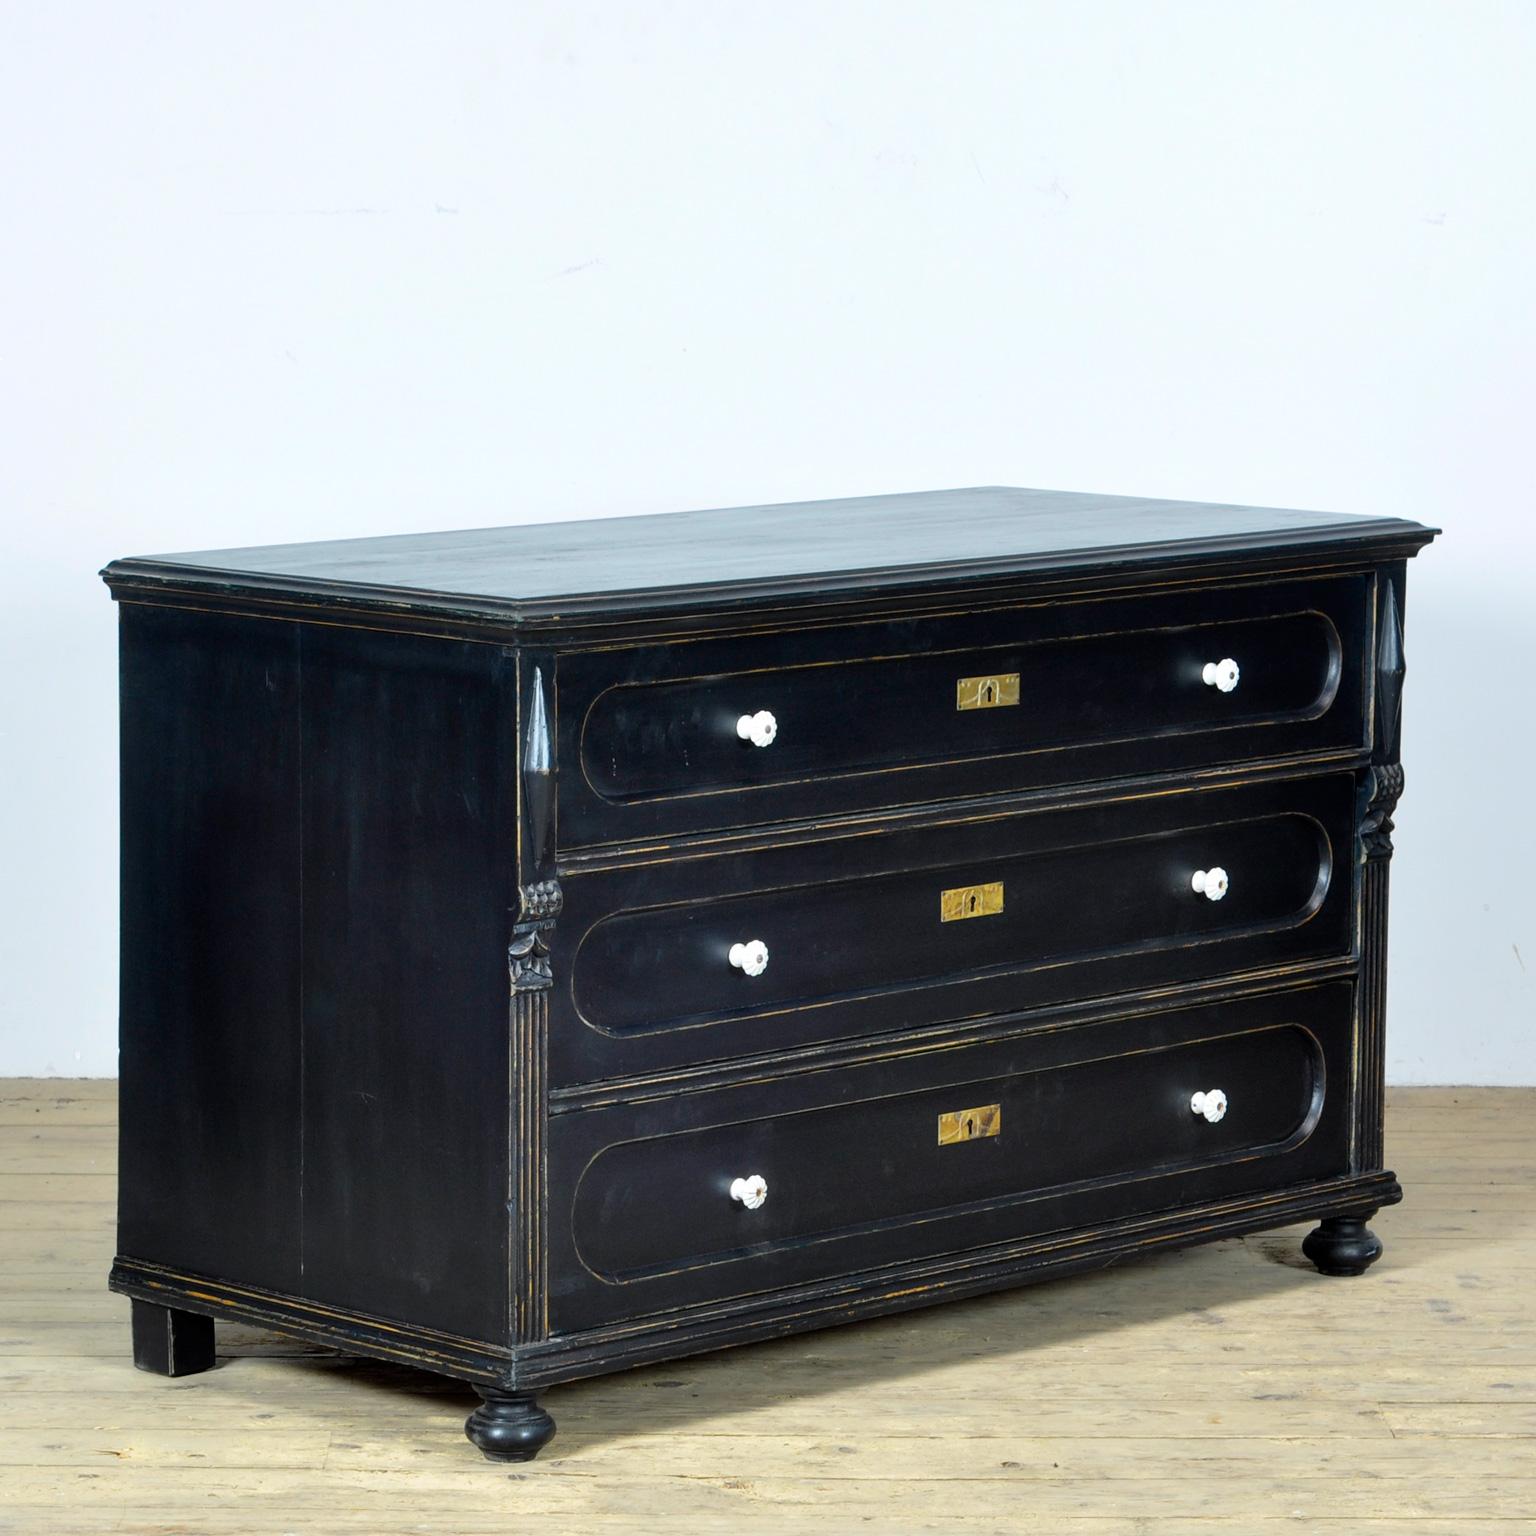 Rustic Pine and Oak Chest of Drawers, circa 1920